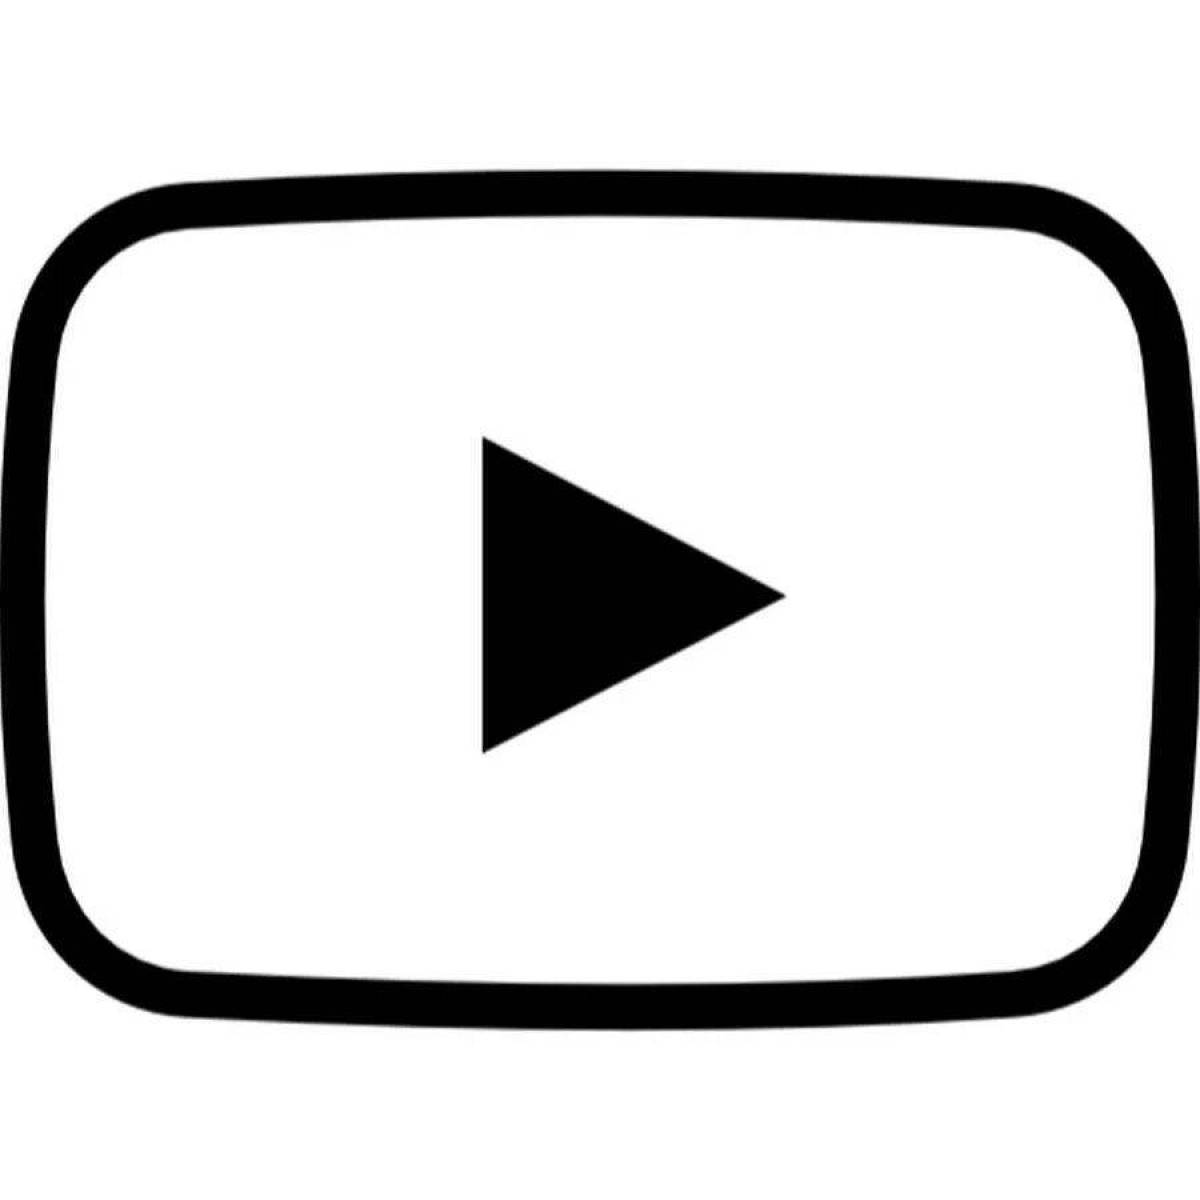 Sparkly youtube button coloring page